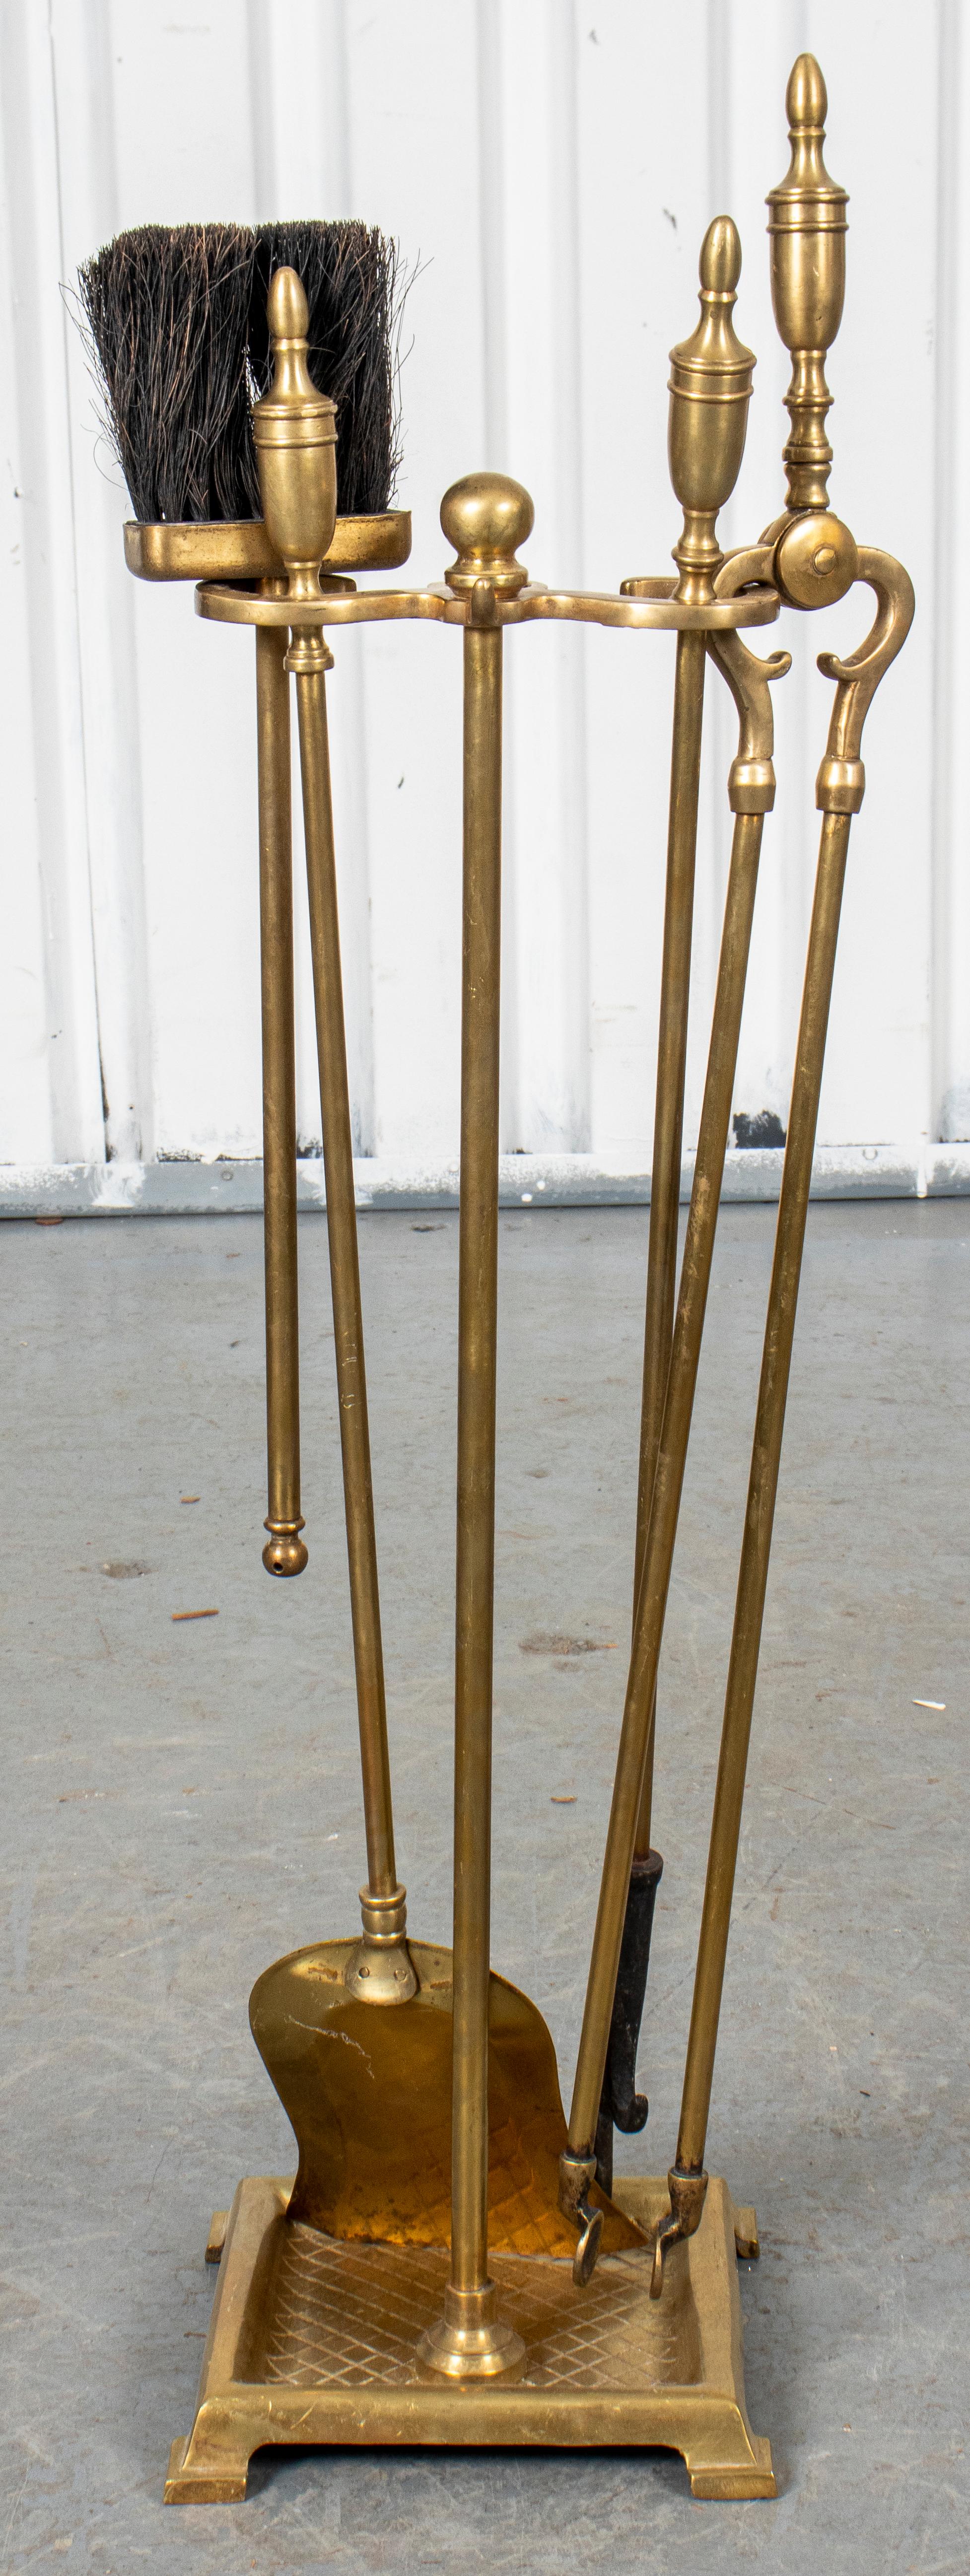 Brass fireplace tool set comprising a stand, tongs, shovel, brush, and log poker, with slim urn finial motif. Measures: 30” H x 10” W x 10” D.